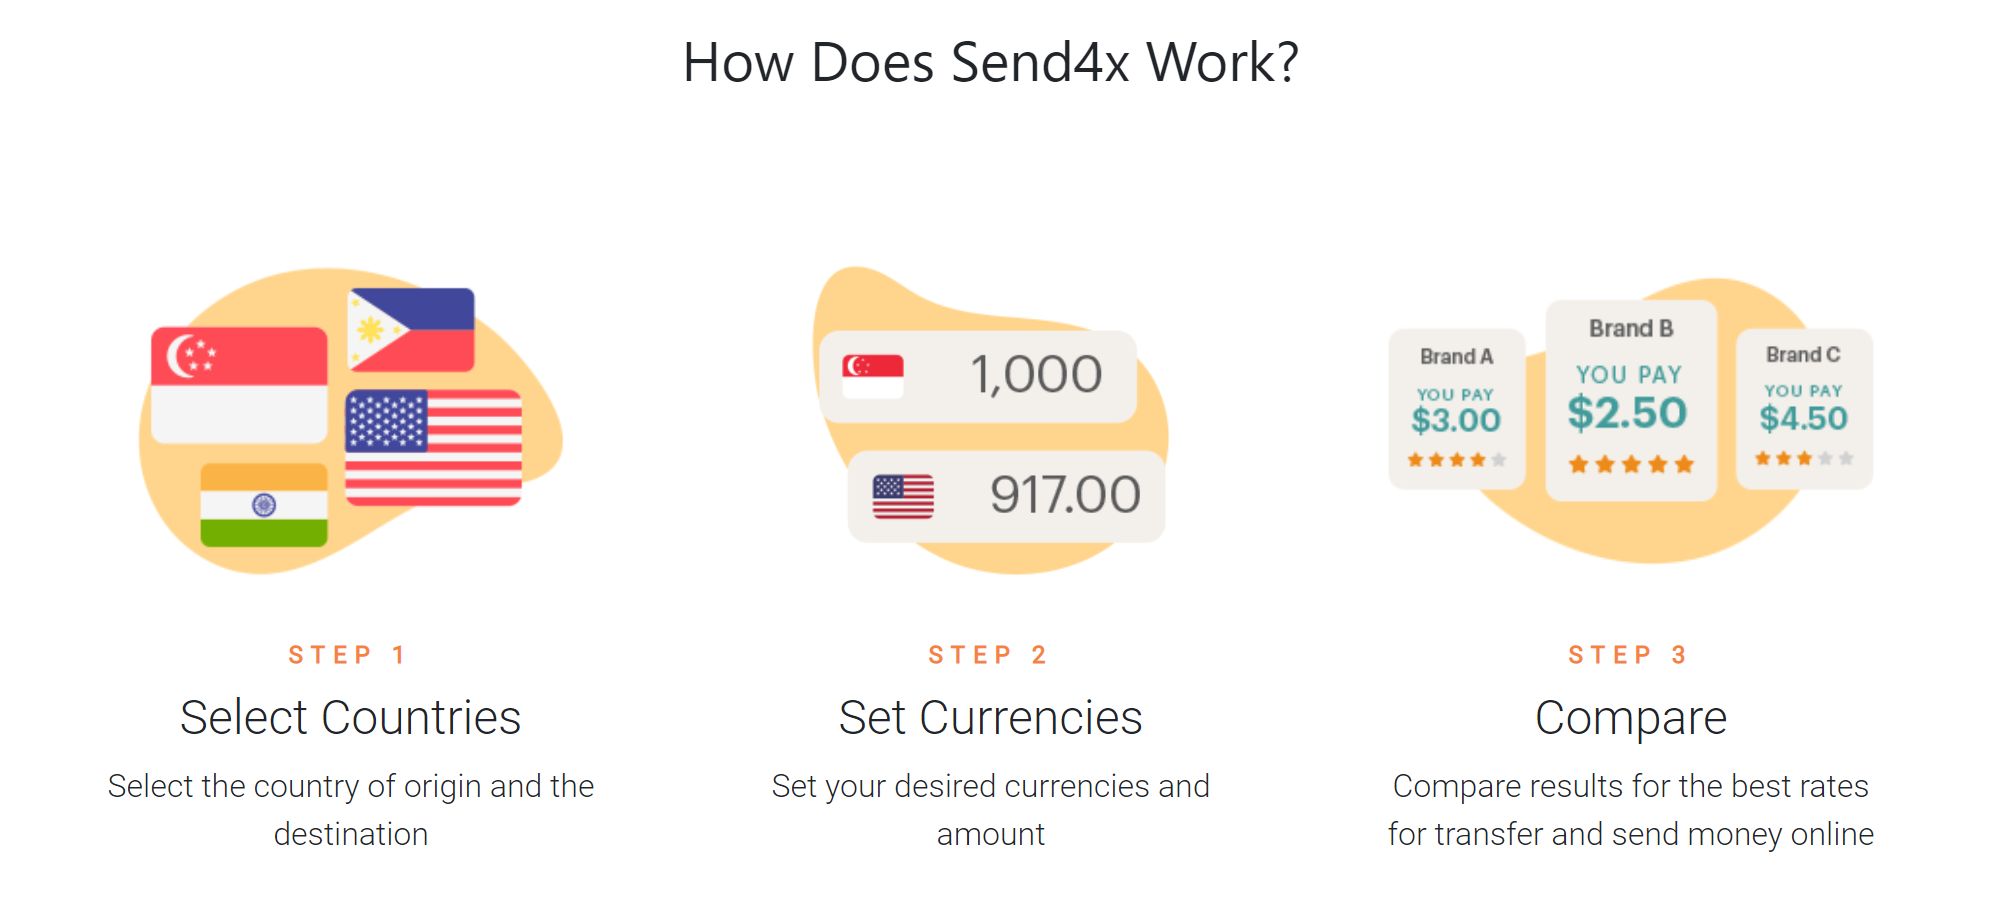 How does Send4x work?